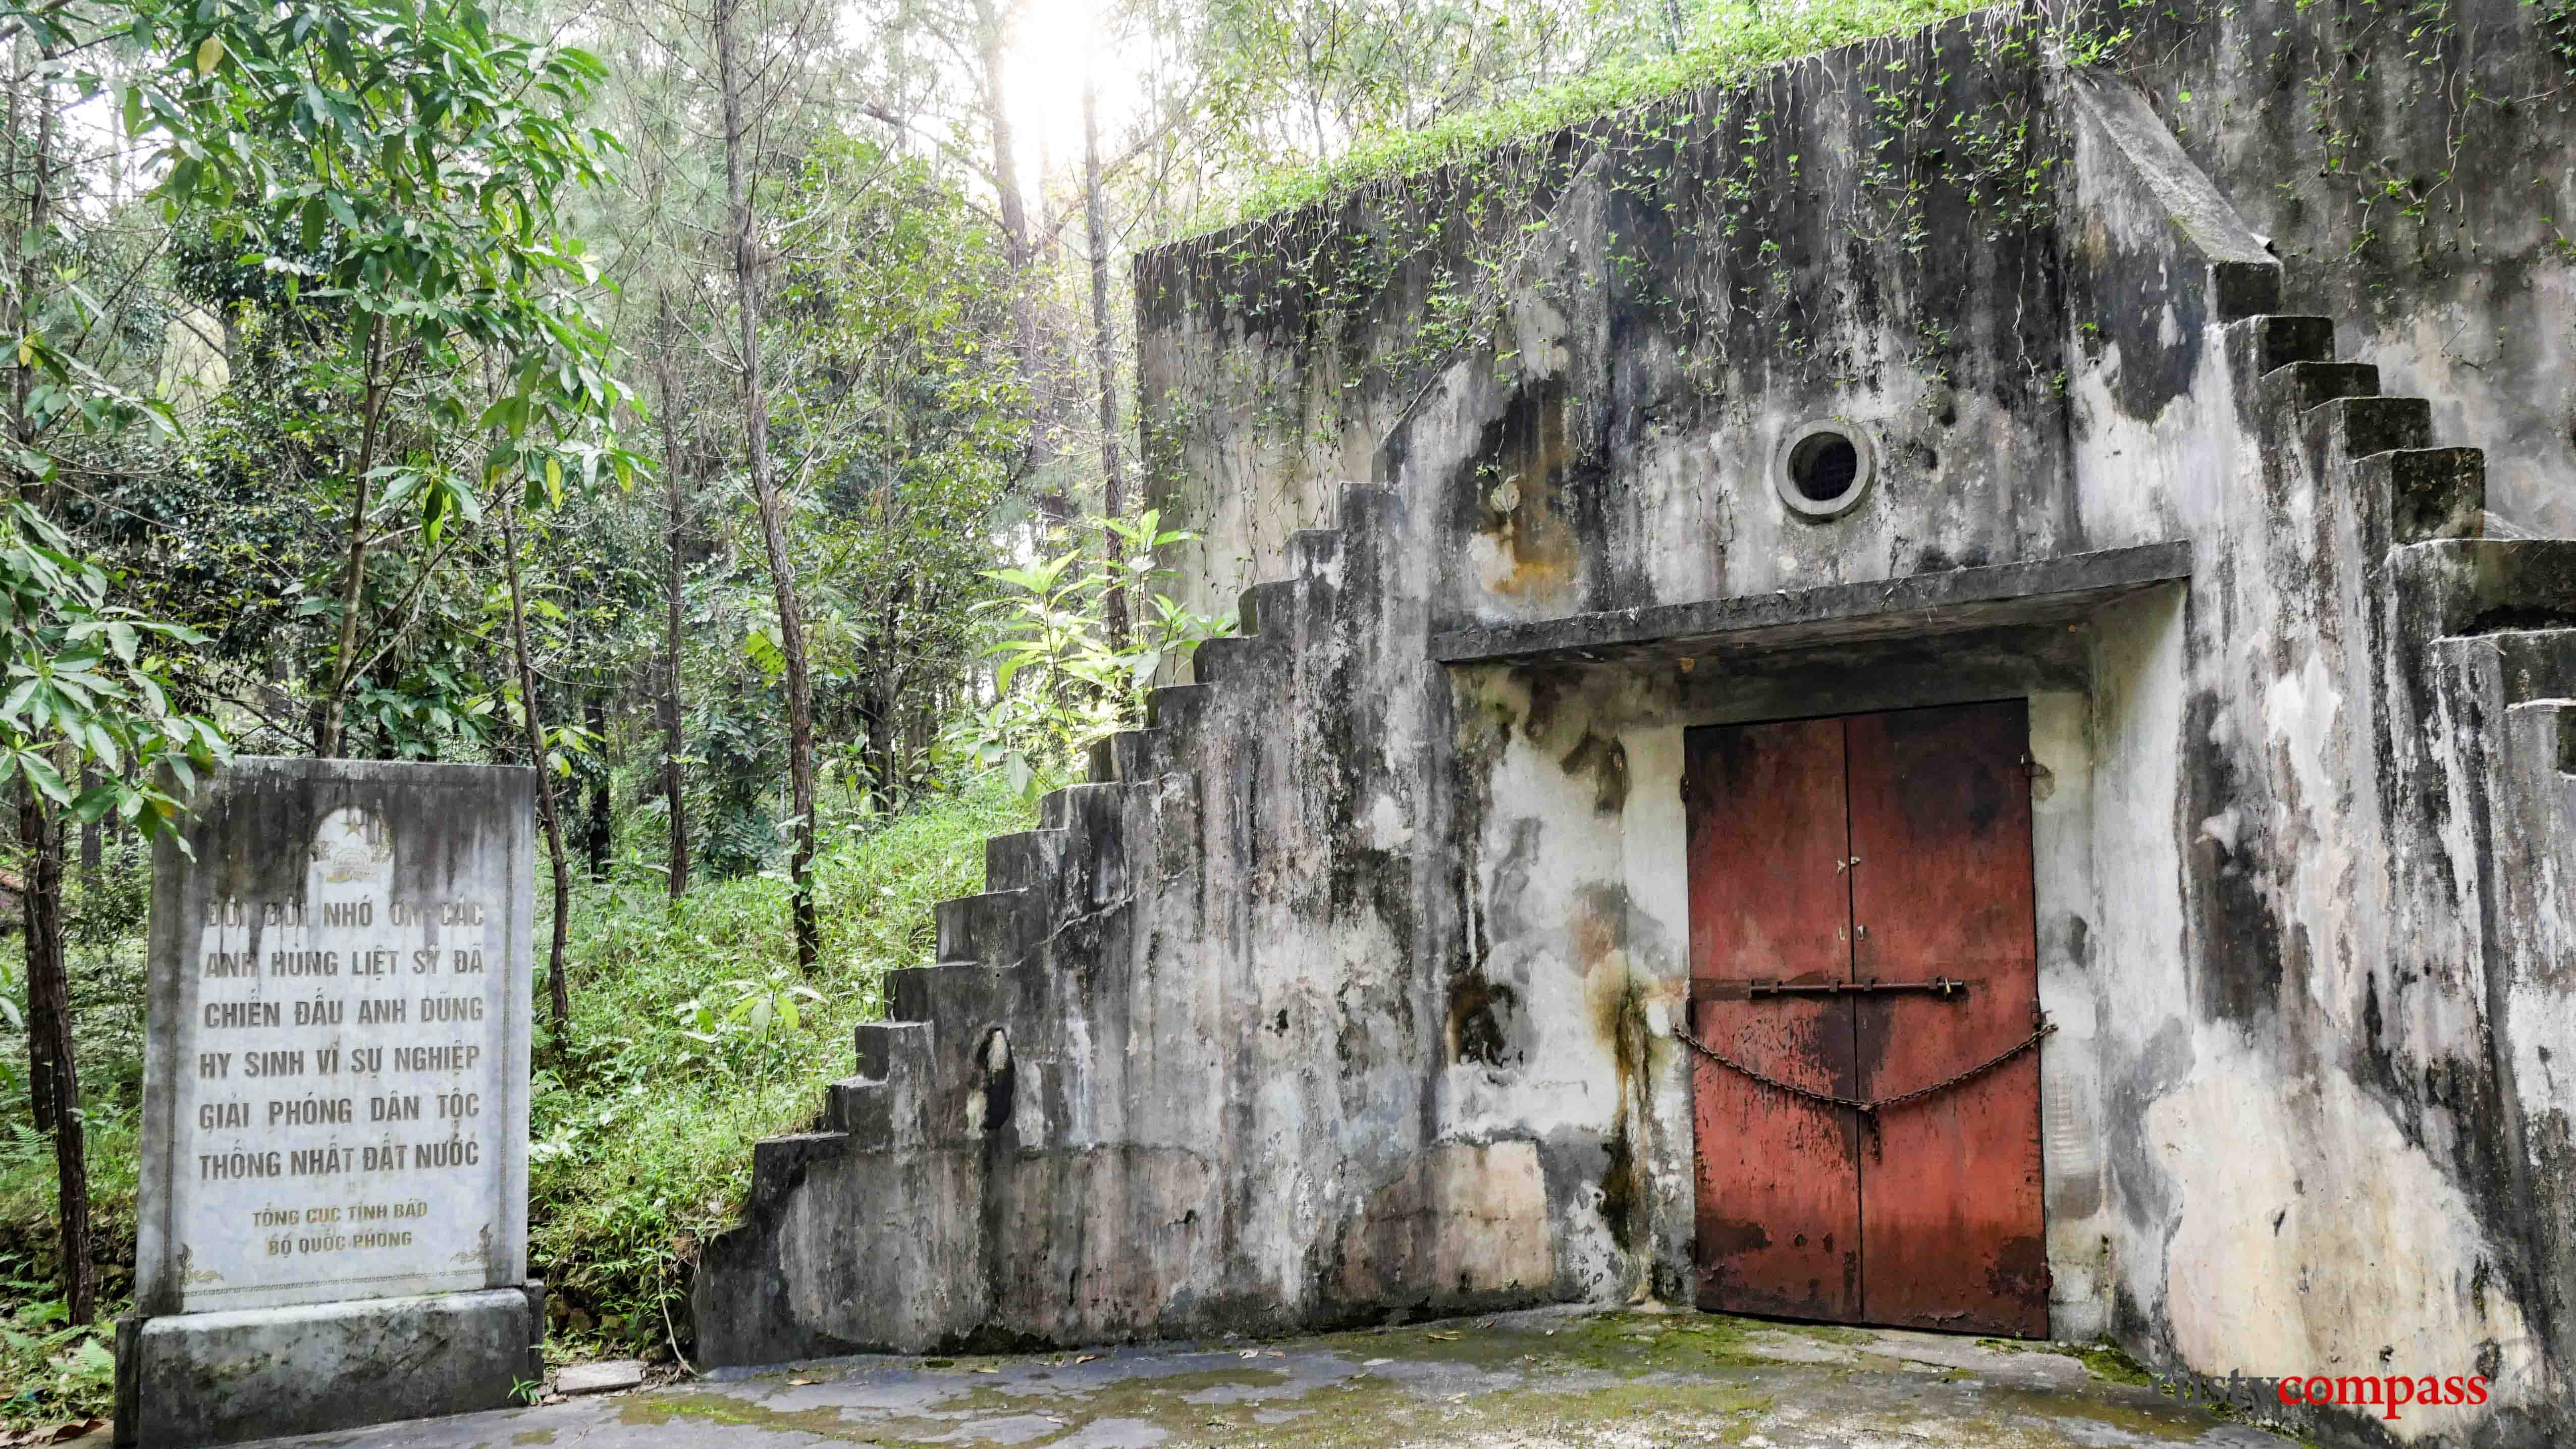 The old French bunkers that became Ngo Dinh Can's torture cells.